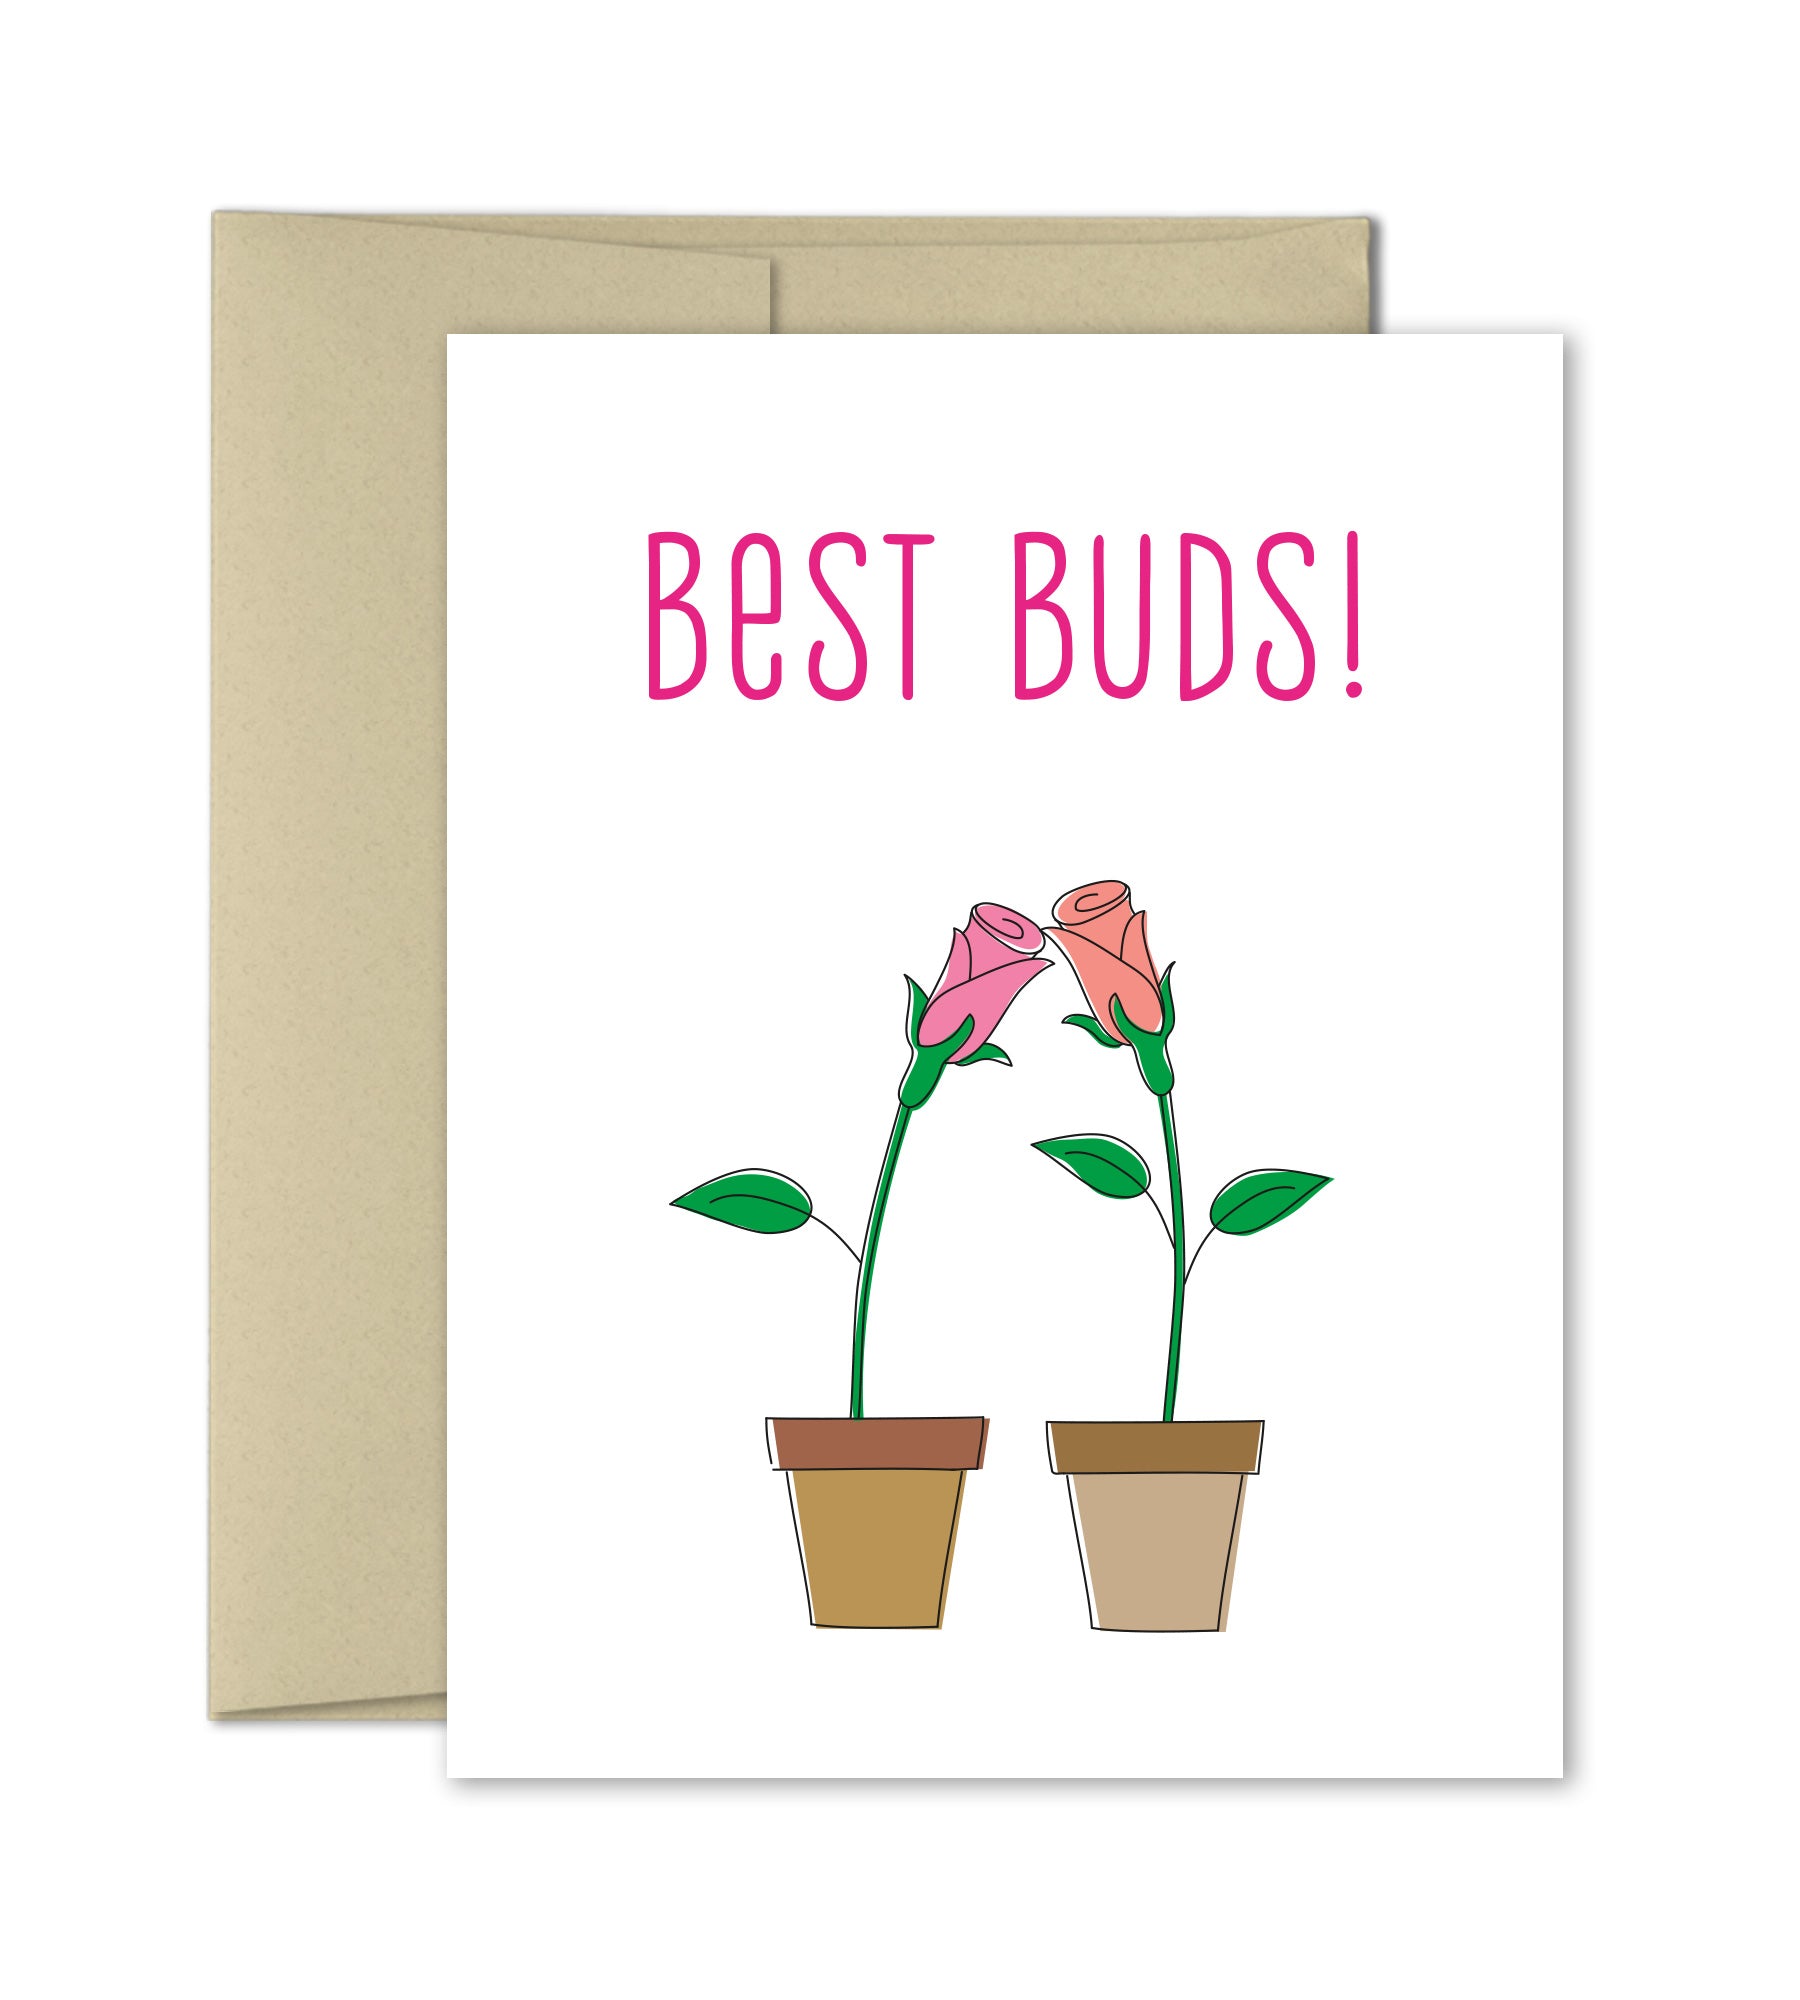 Best Buds - Friendship Card by The Imagination Spot